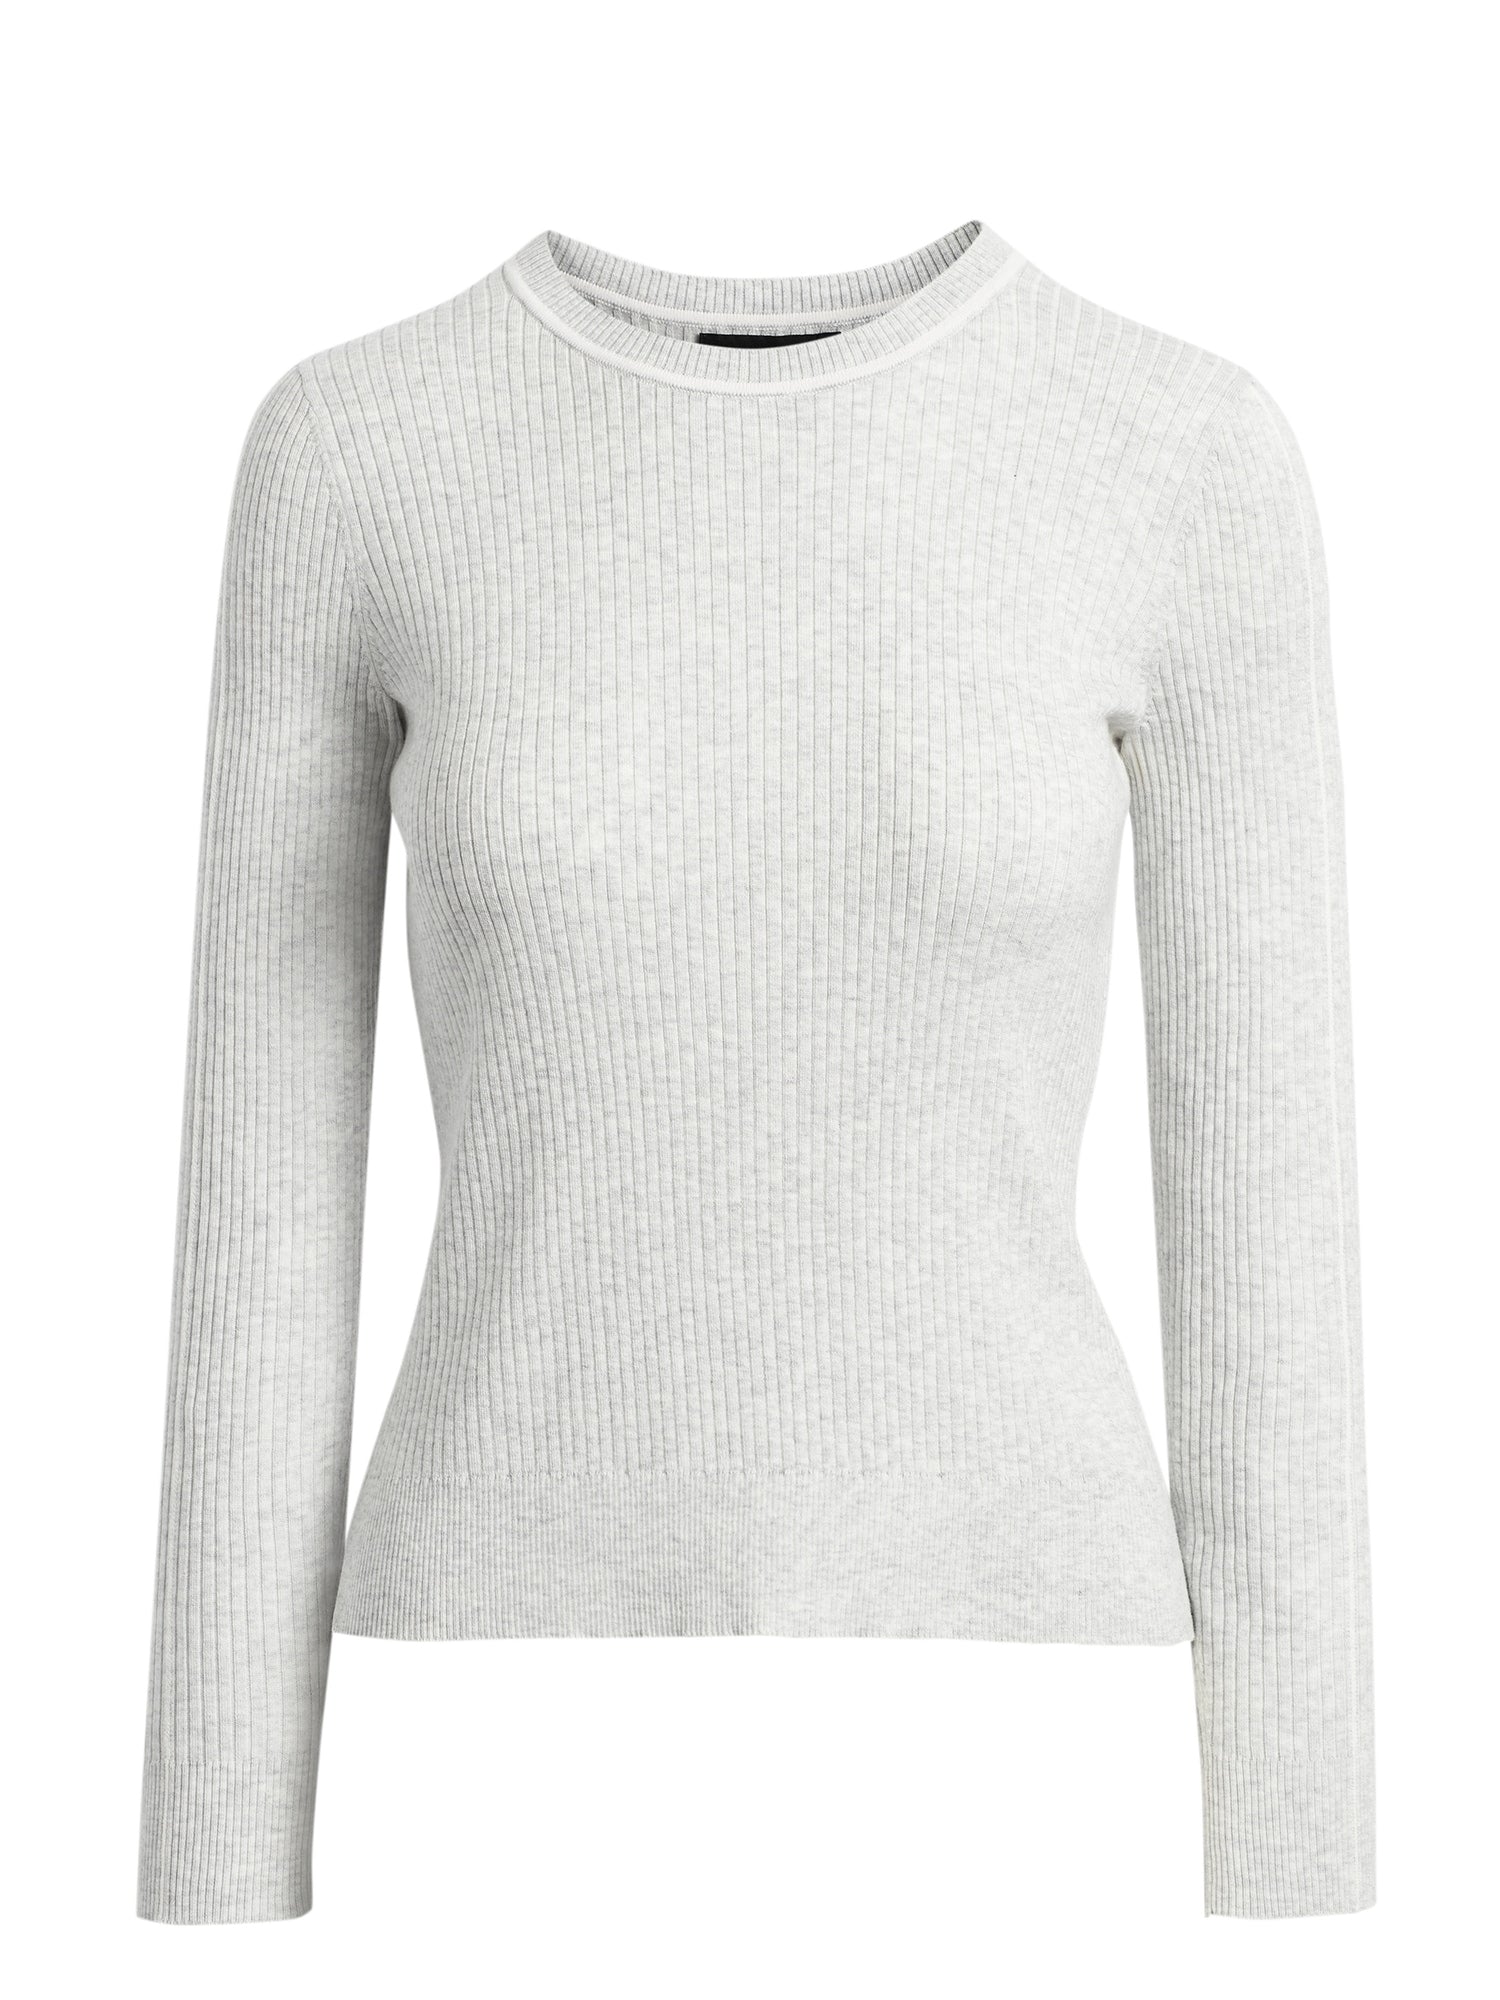 white fitted sweater